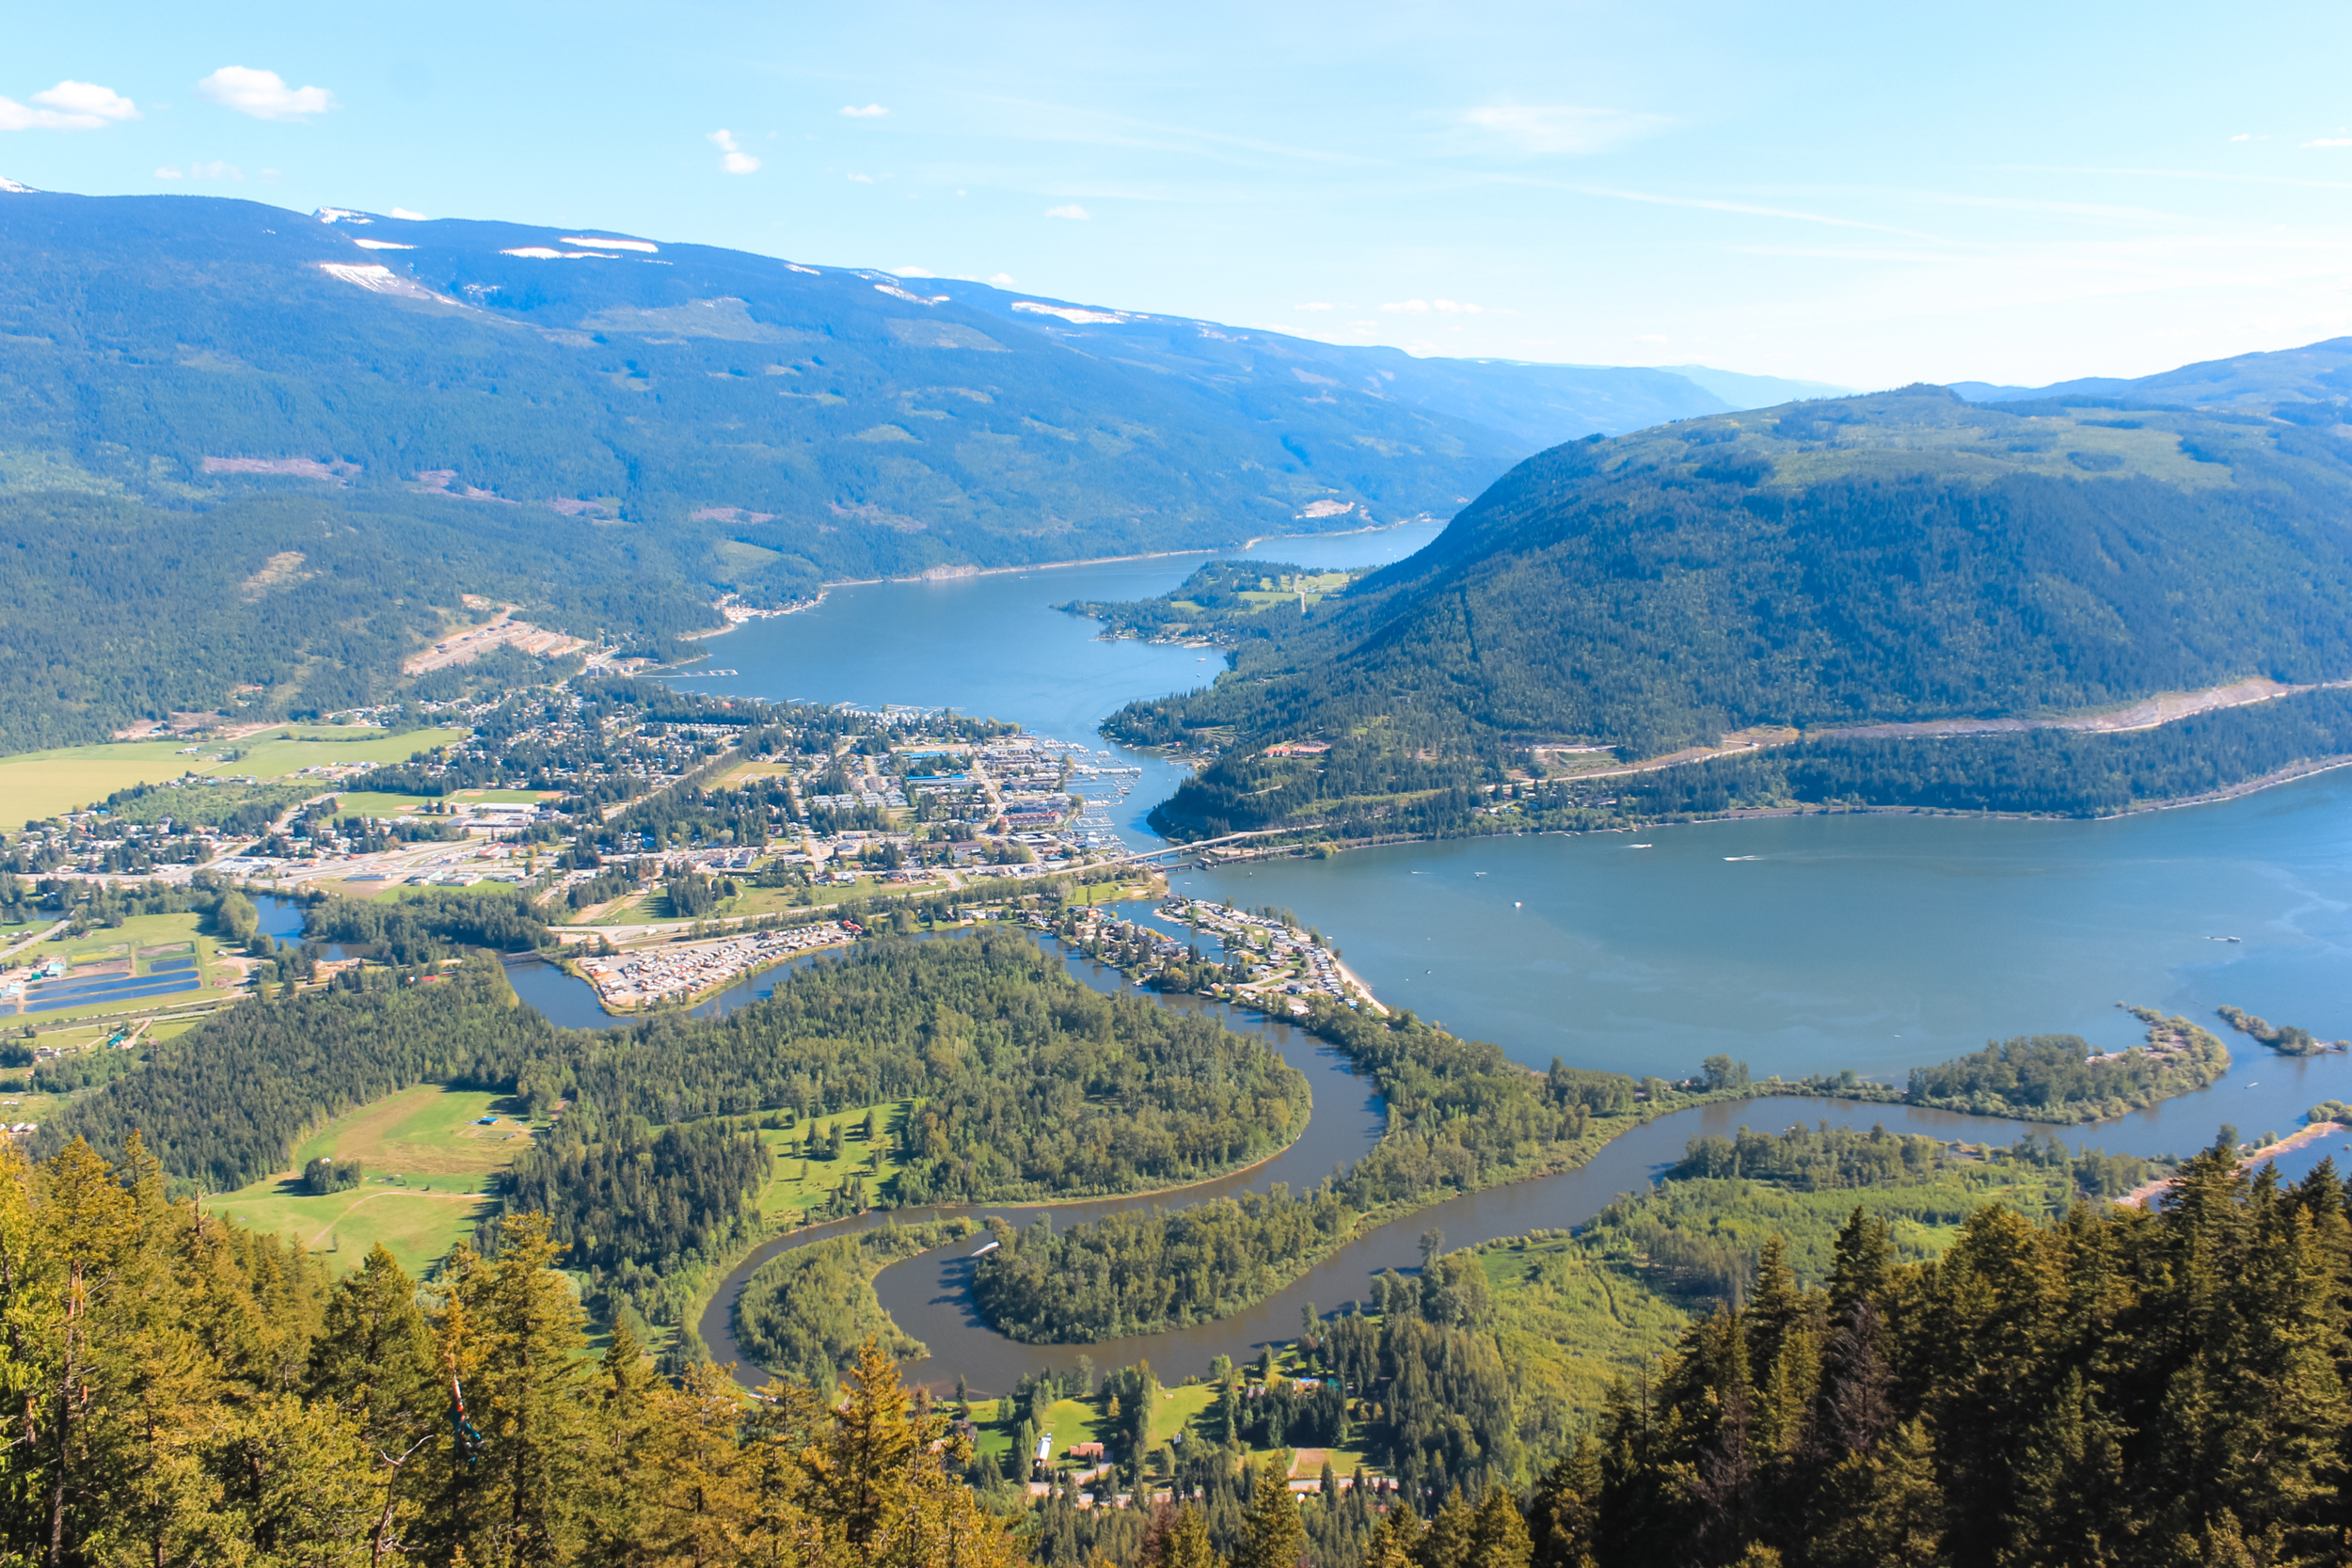 Sicamous Lookout in Sicamous, BC